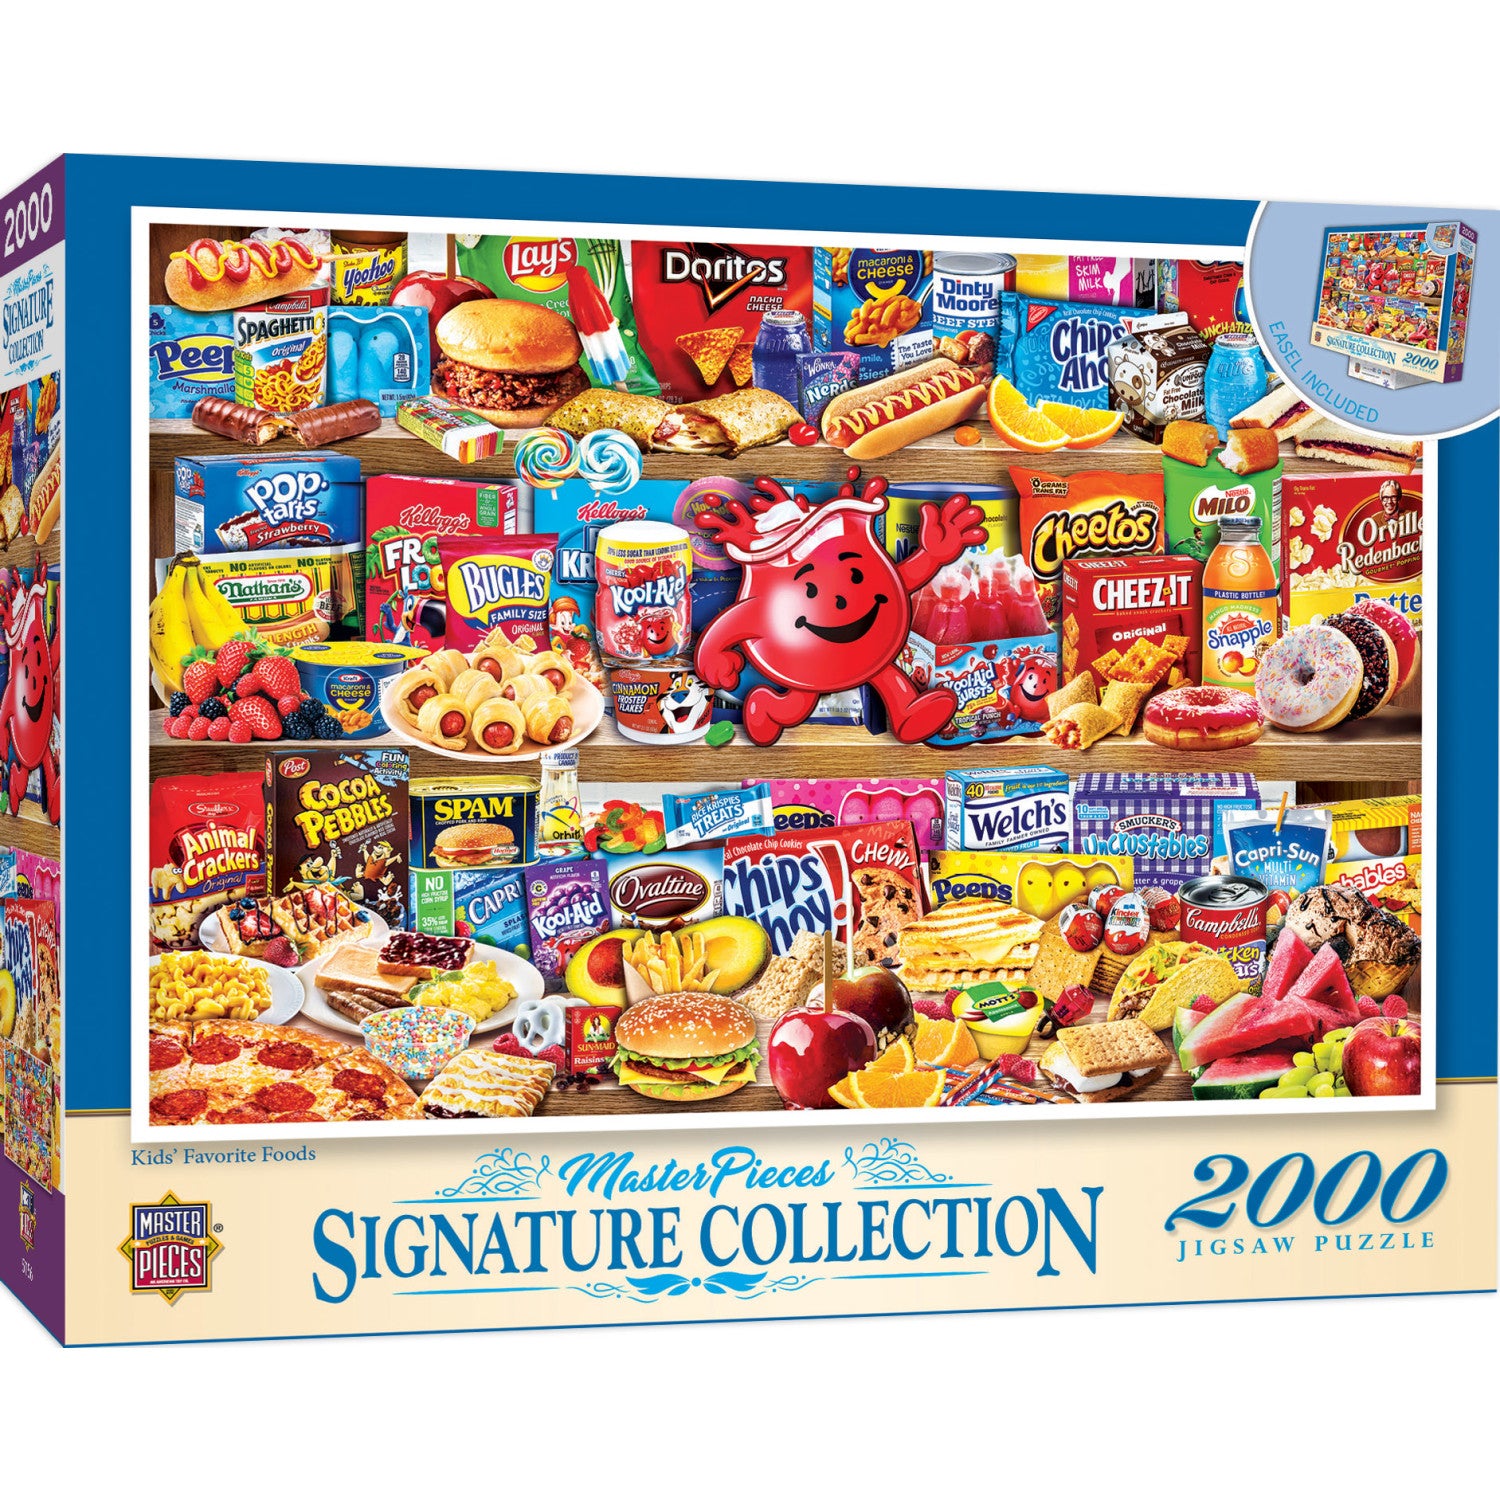 Signature Collection - Kids' Favorite Foods 2000 Piece Jigsaw Puzzle